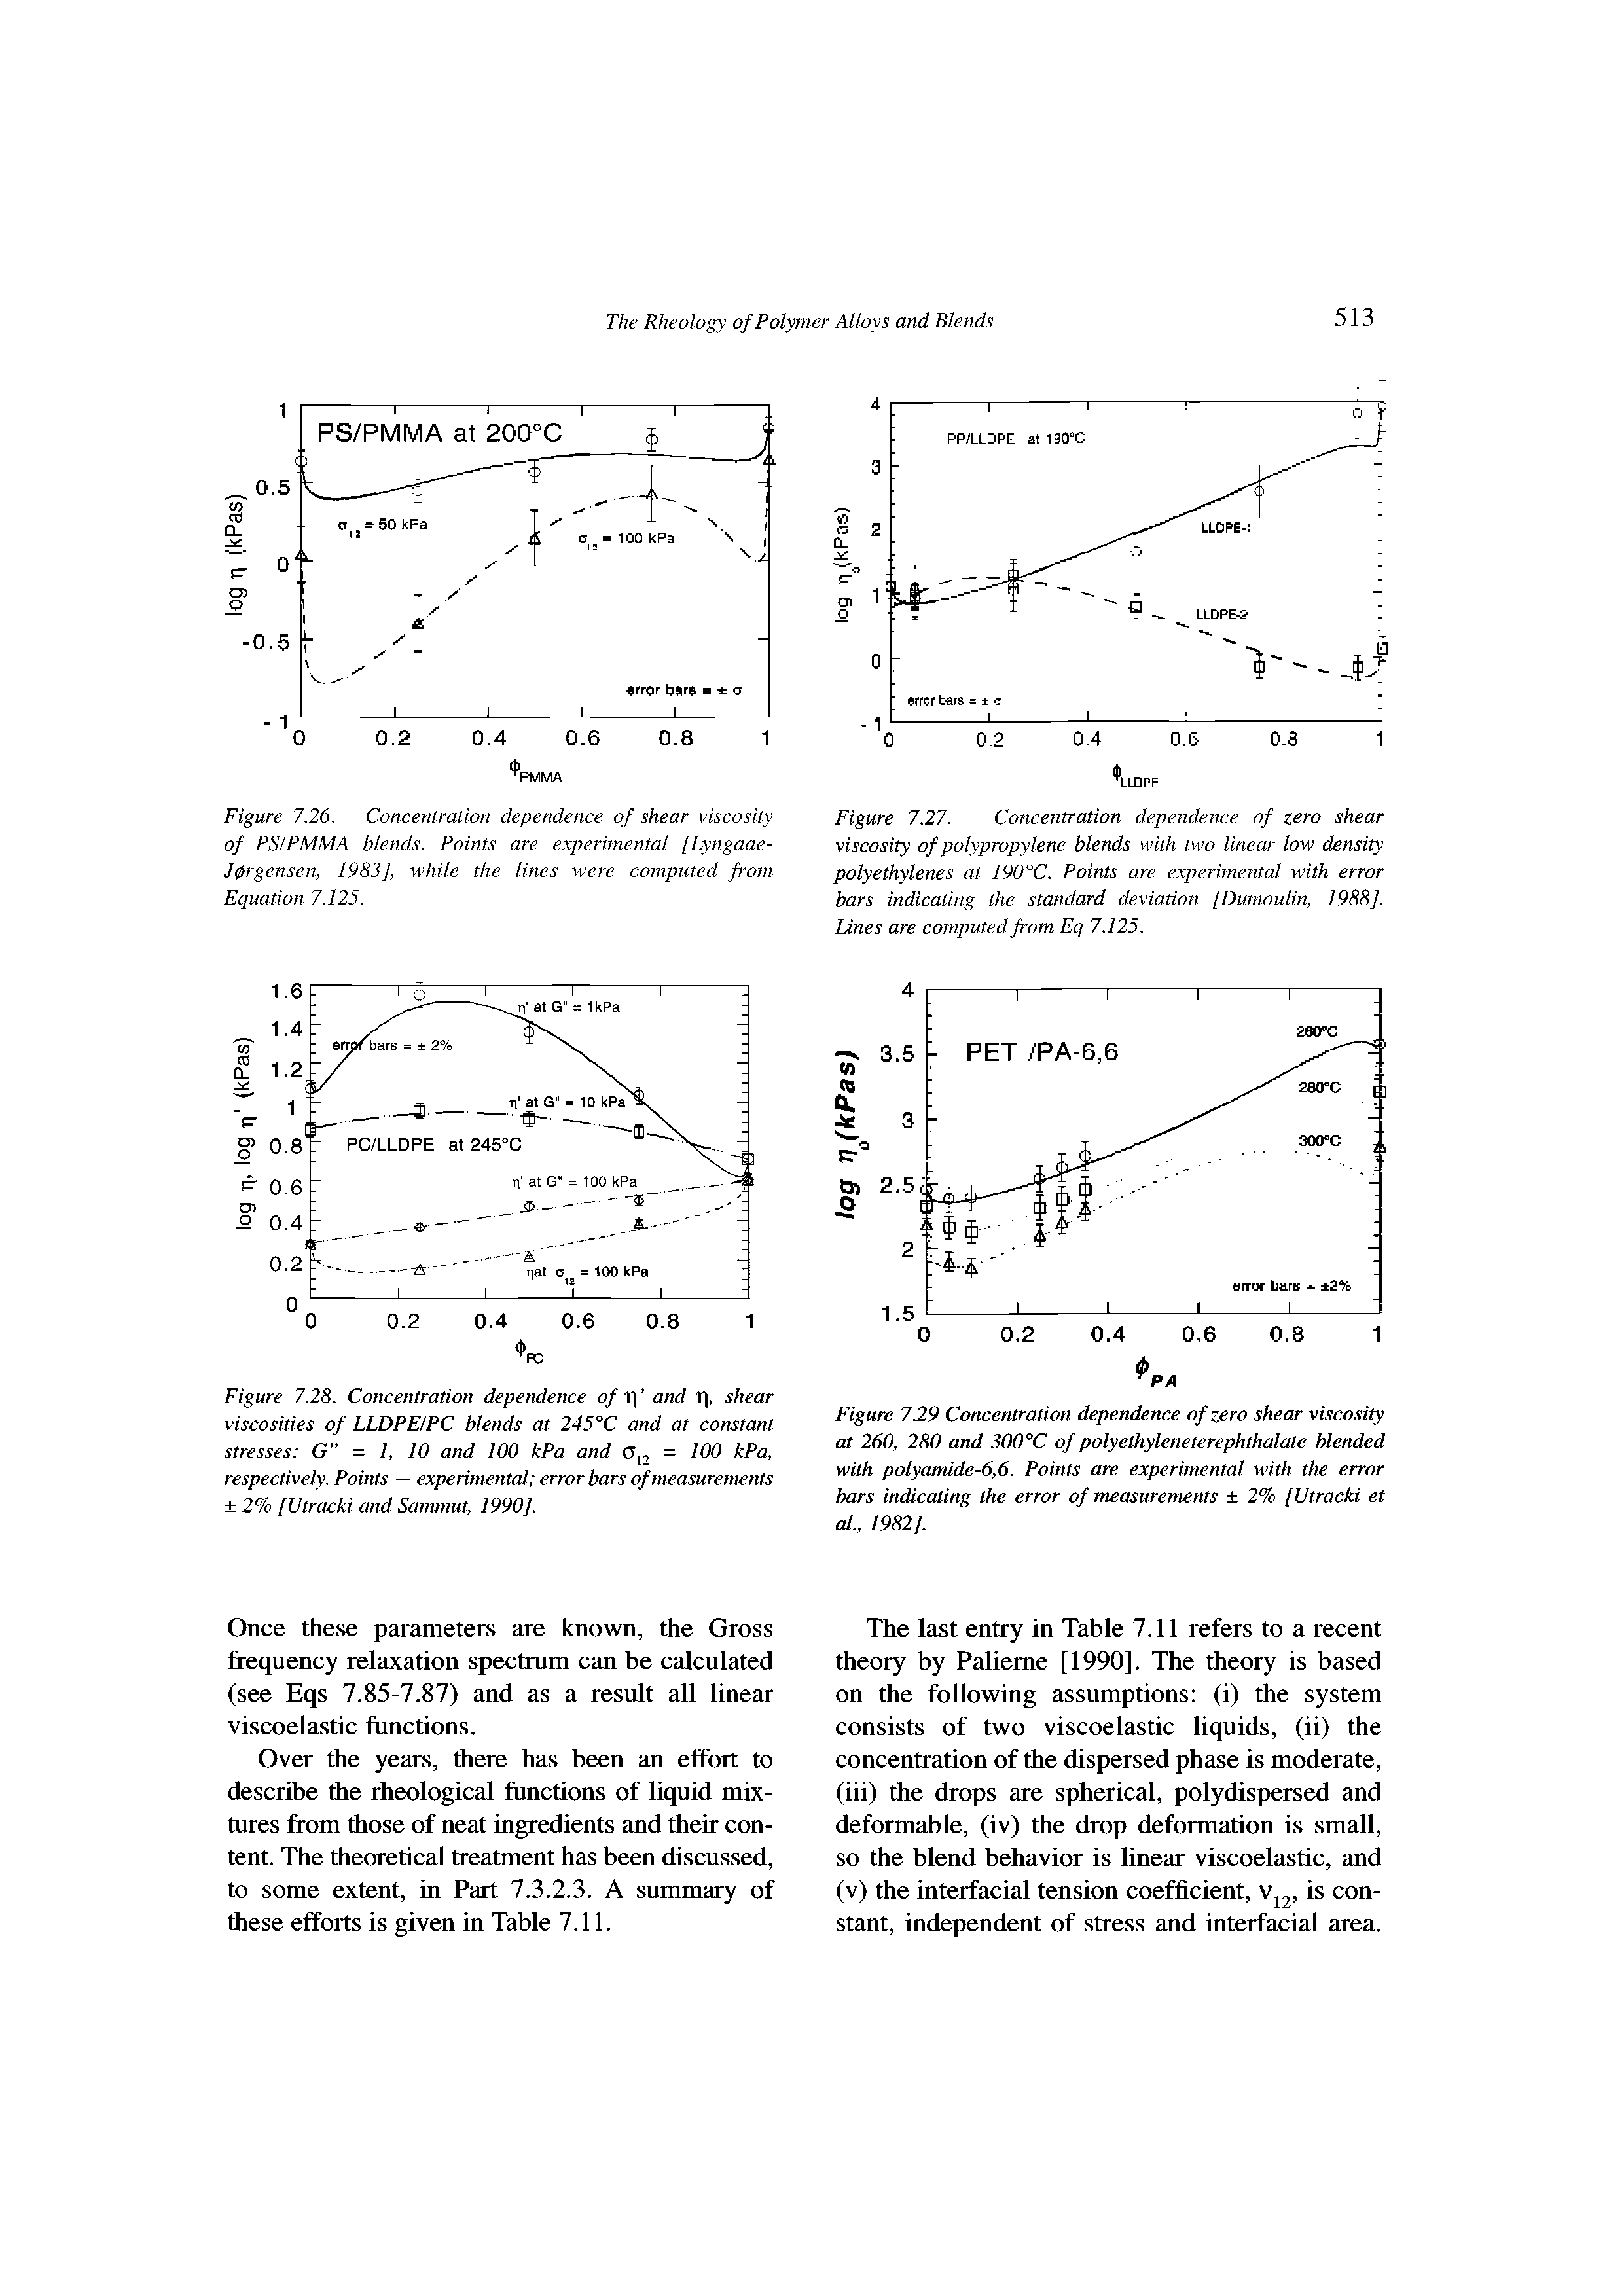 Figure 7.26. Concentration dependence of shear viscosity of PS/PMMA blends. Points are experimental [Lyngaae-Jprgensen, 1983], while the lines were computed from Equation 7.125.